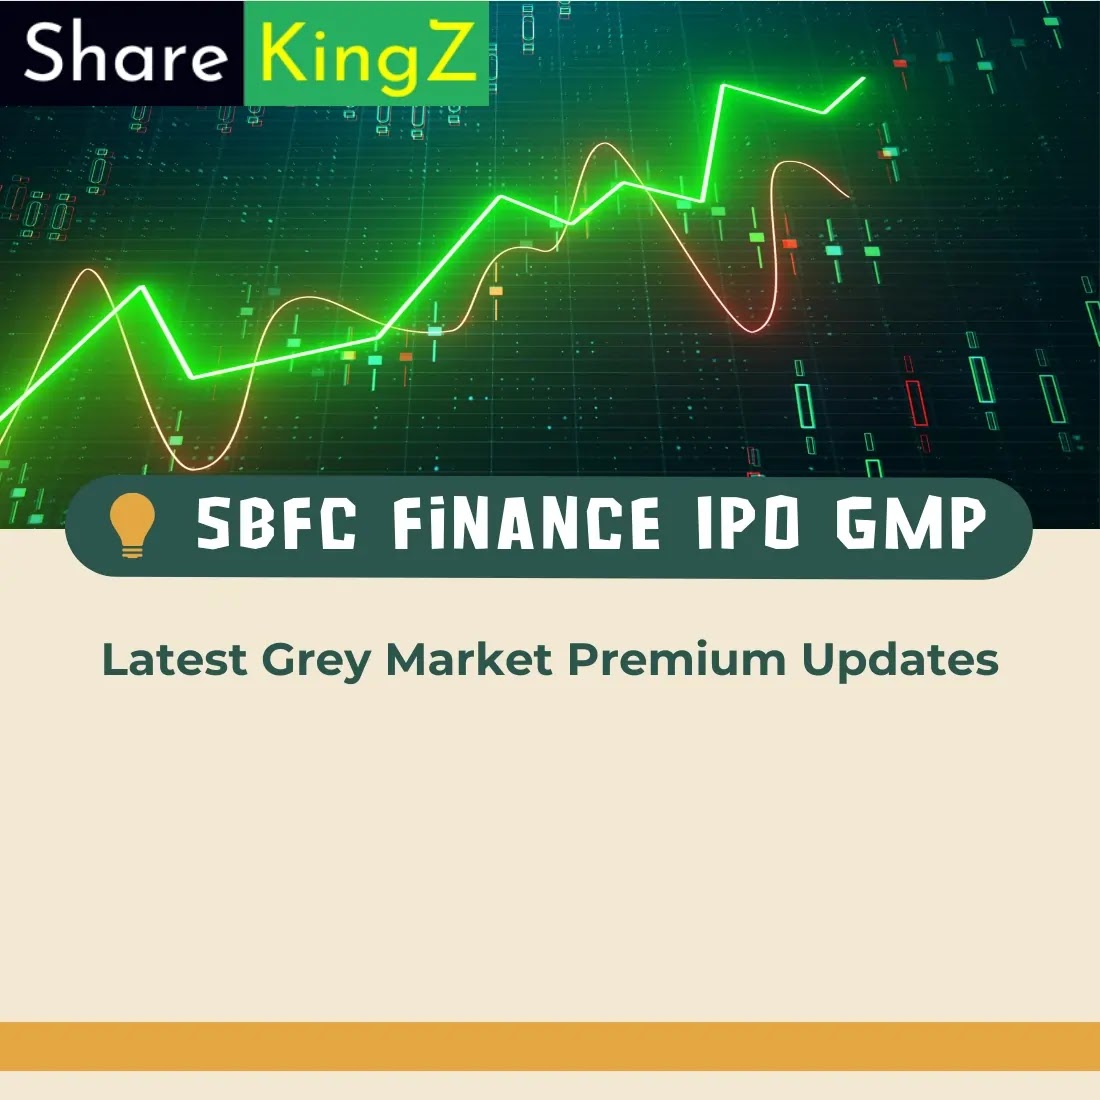 SBFC Finance IPO GMP Today